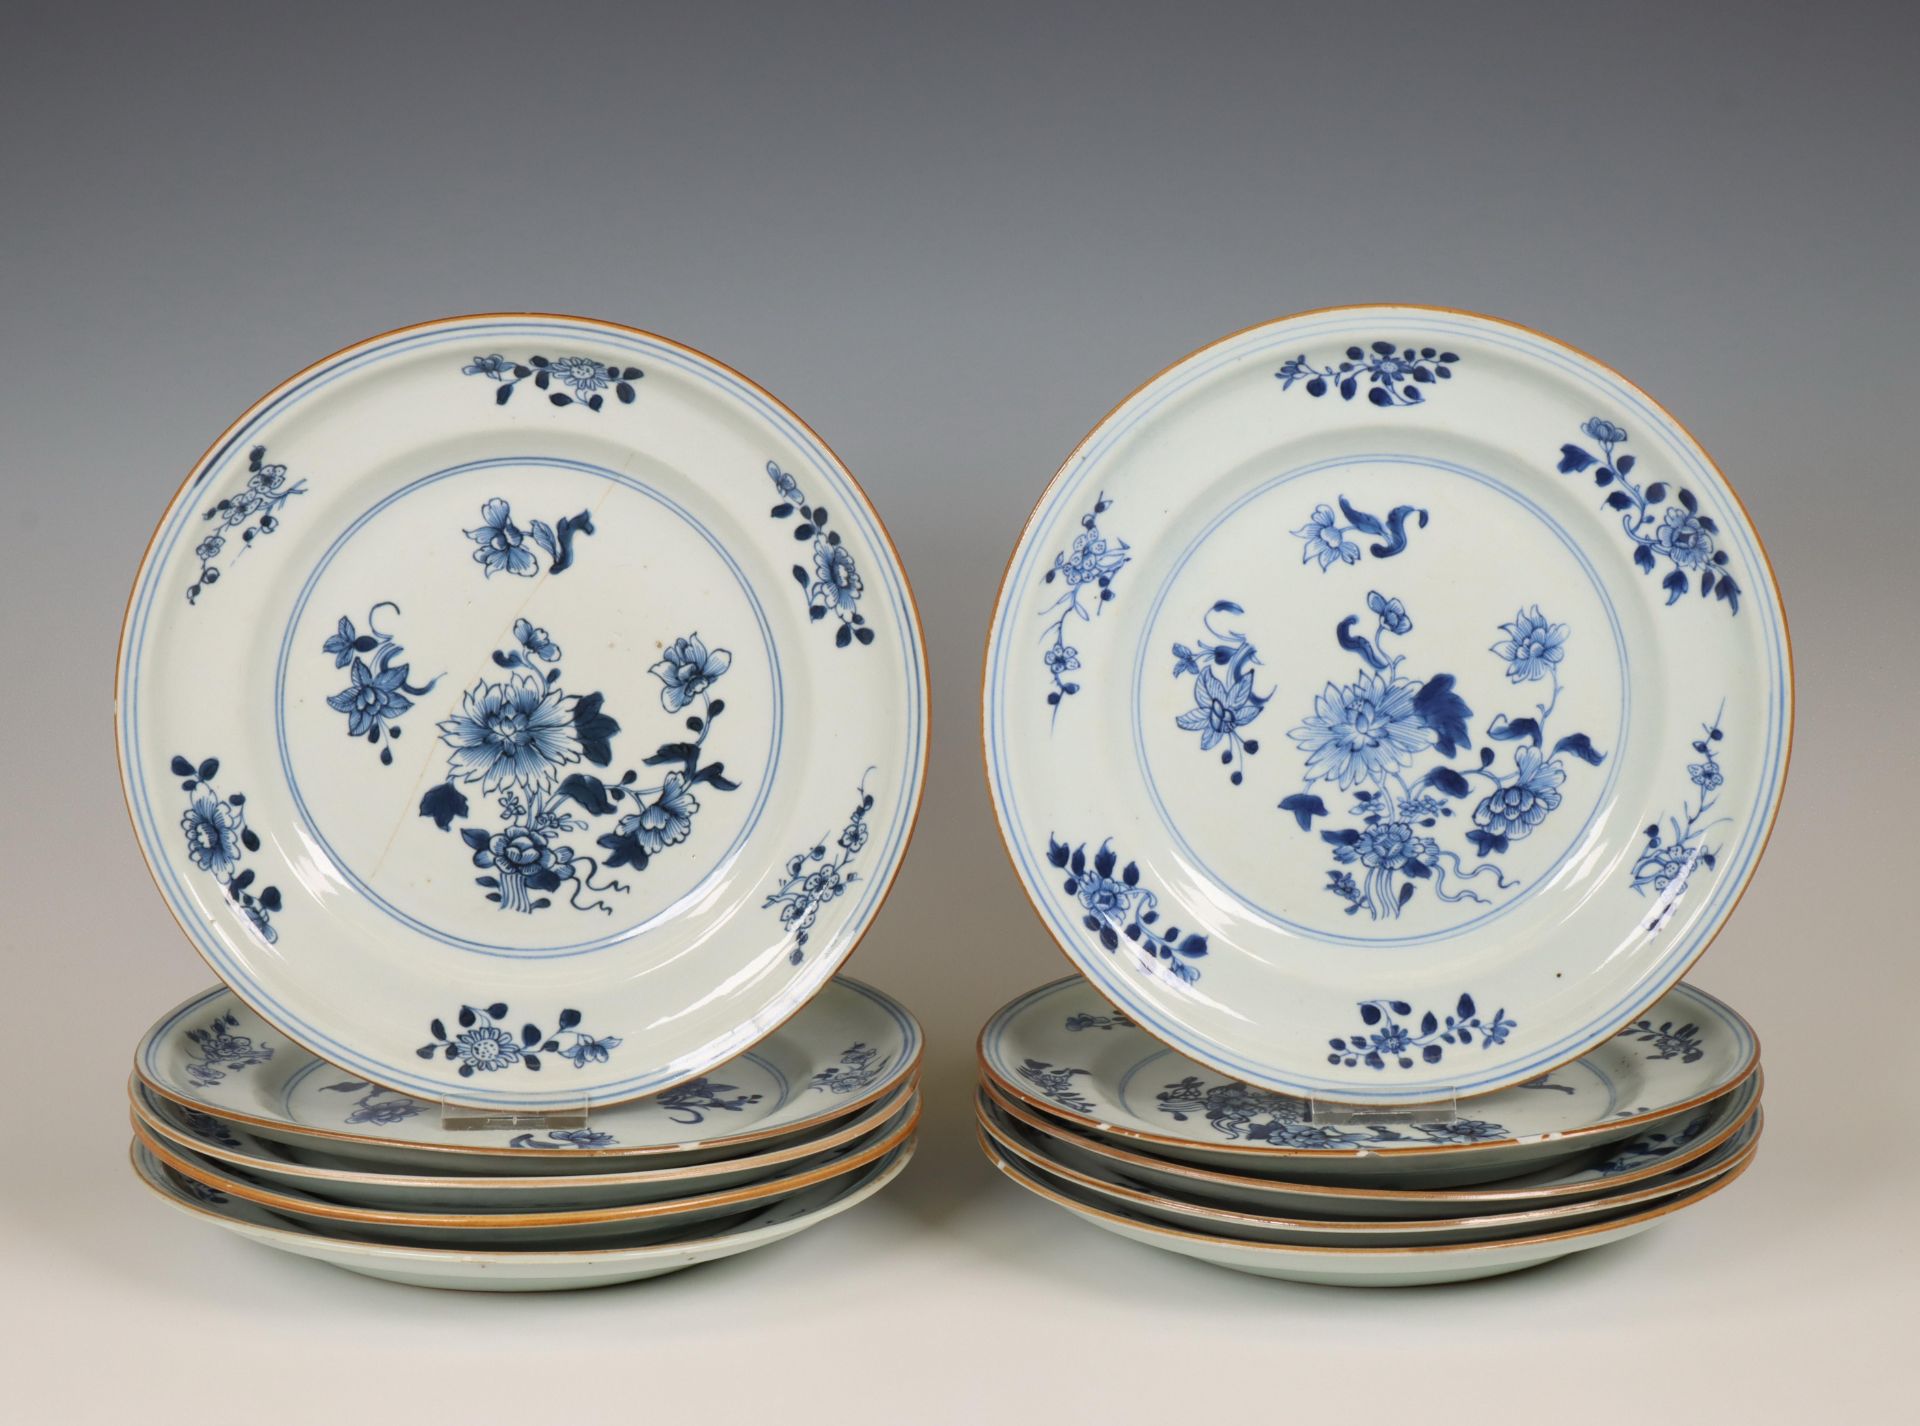 China, set of ten blue and white porcelain plates, Qianlong period (1736-1795),